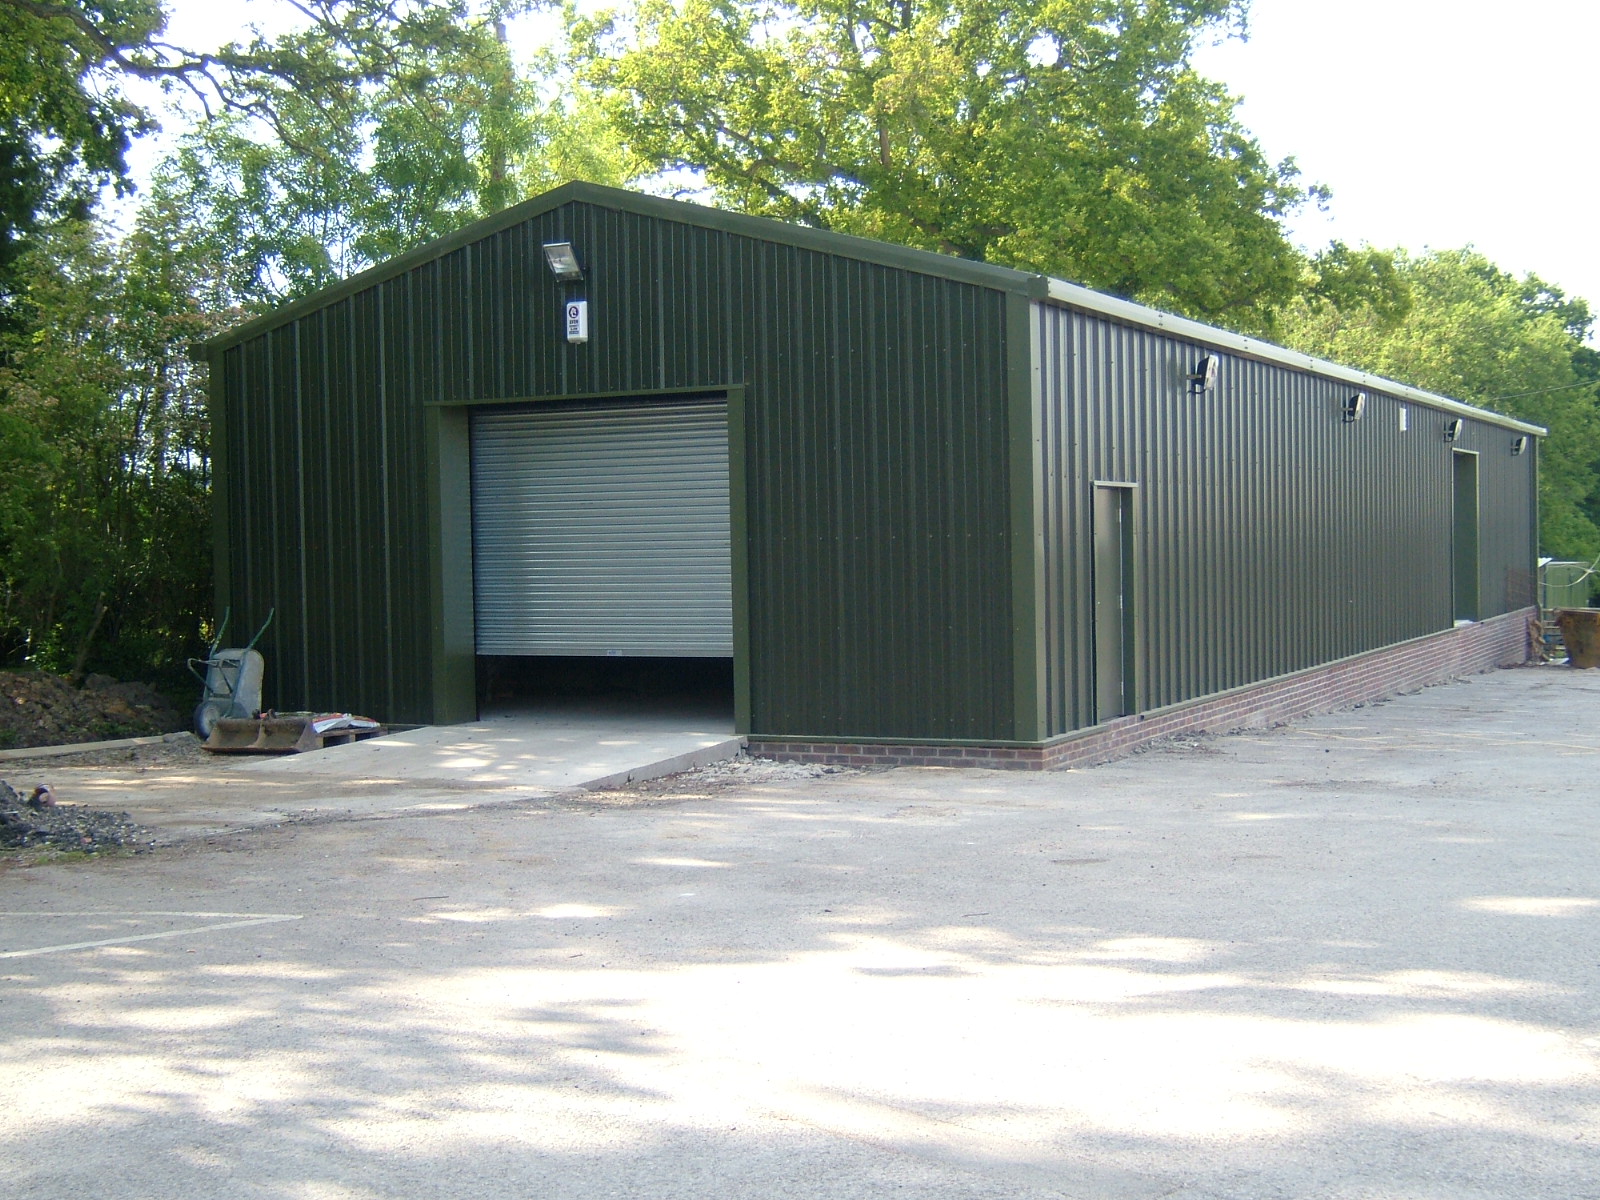 agricultural development, agricultural steel buildings and